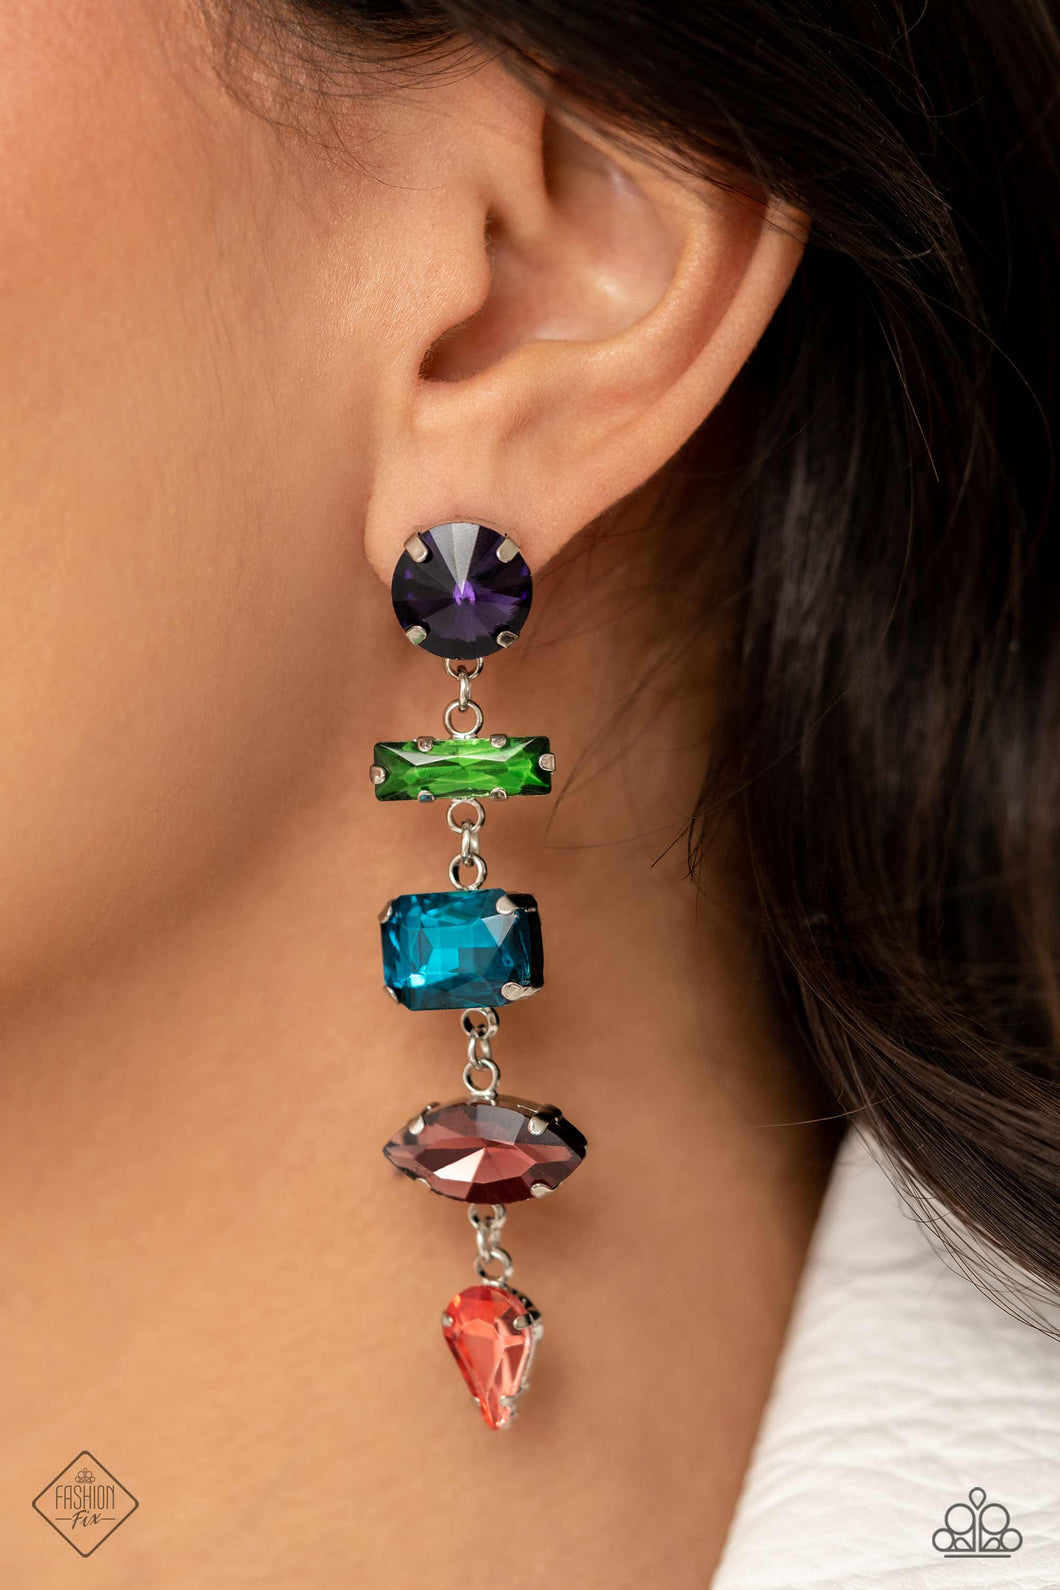 Five various-cut multicolored rhinestones, set in classic shiny silver pronged settings, stack one over the other creating a colorfully industrial lure. Earring attaches to a standard post fitting.  Sold as one pair of post earrings.